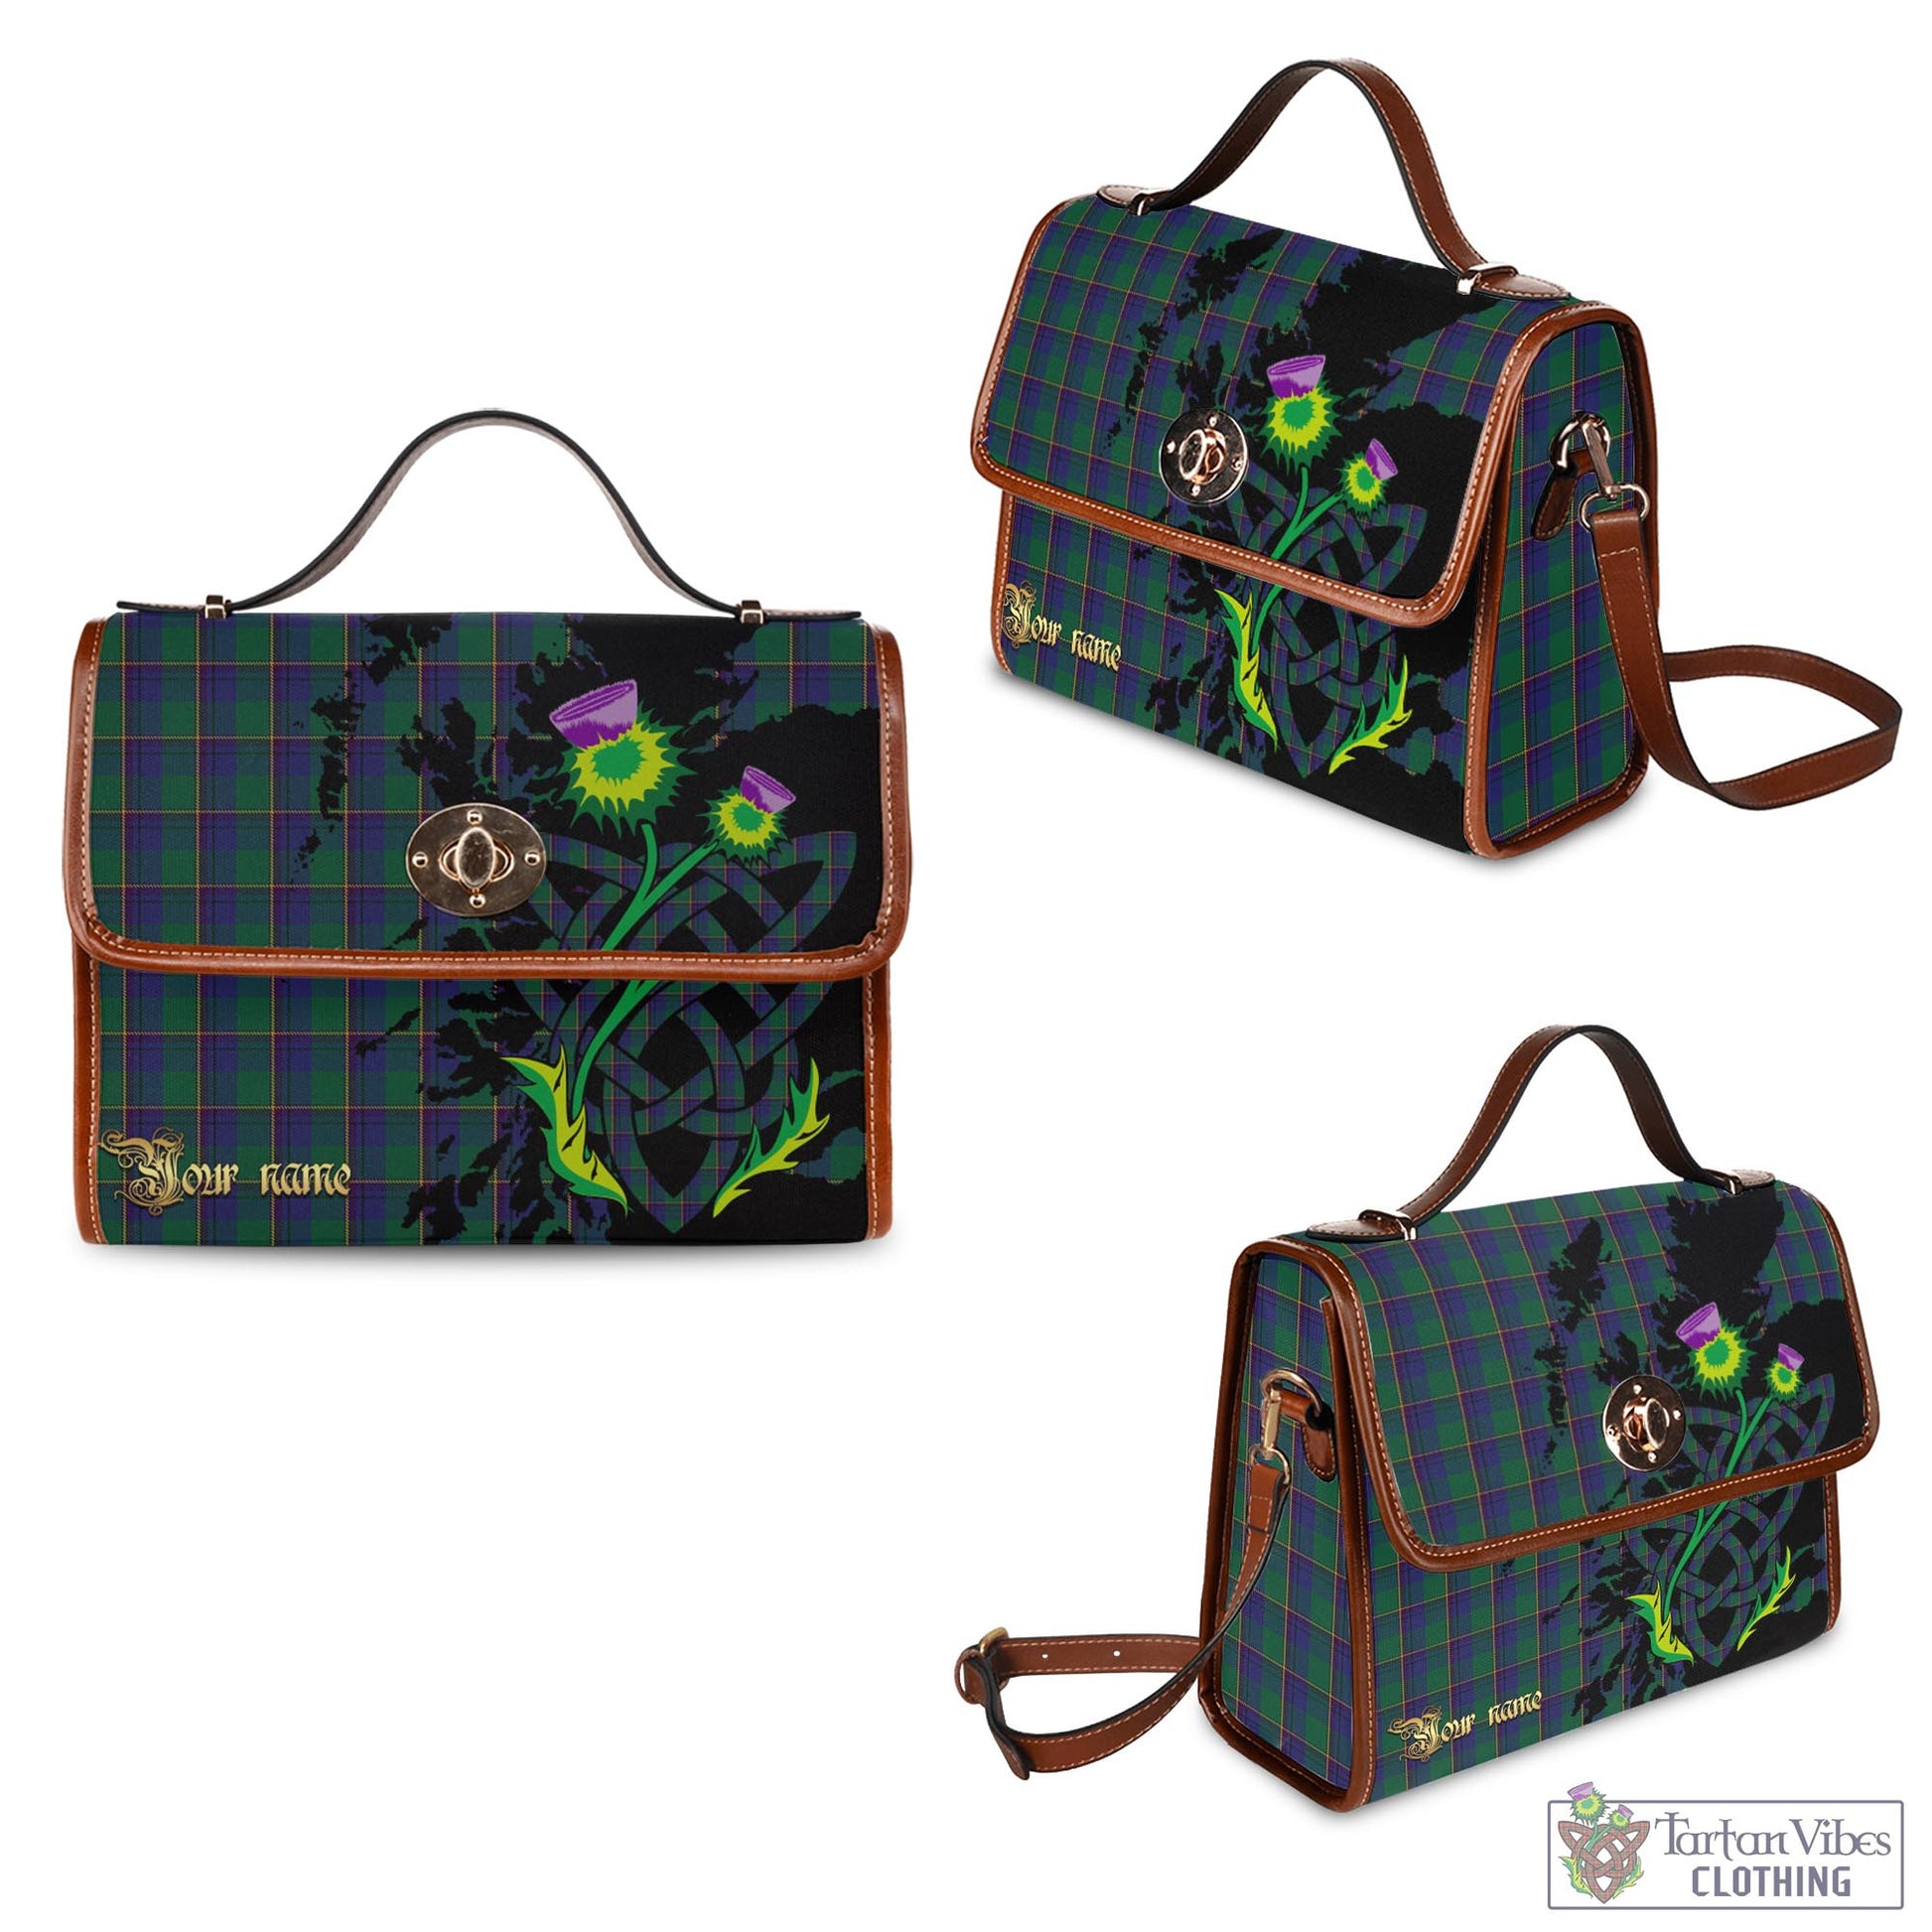 Tartan Vibes Clothing Lowry Tartan Waterproof Canvas Bag with Scotland Map and Thistle Celtic Accents